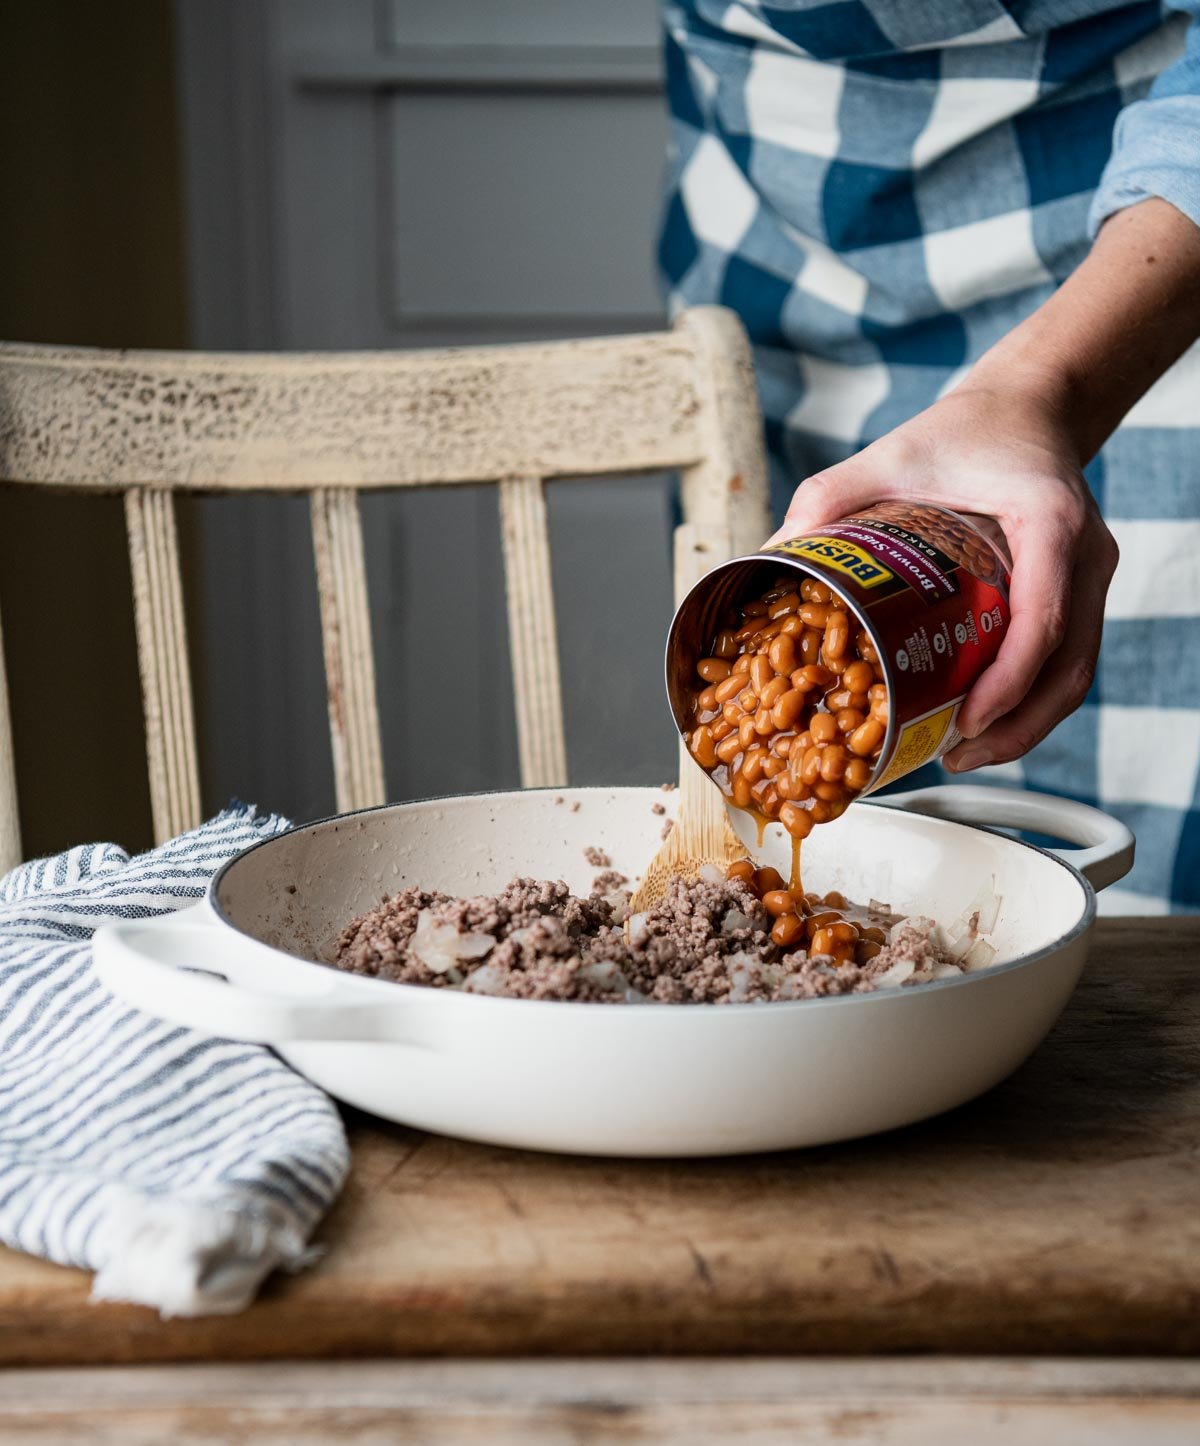 Adding baked beans to a casserole